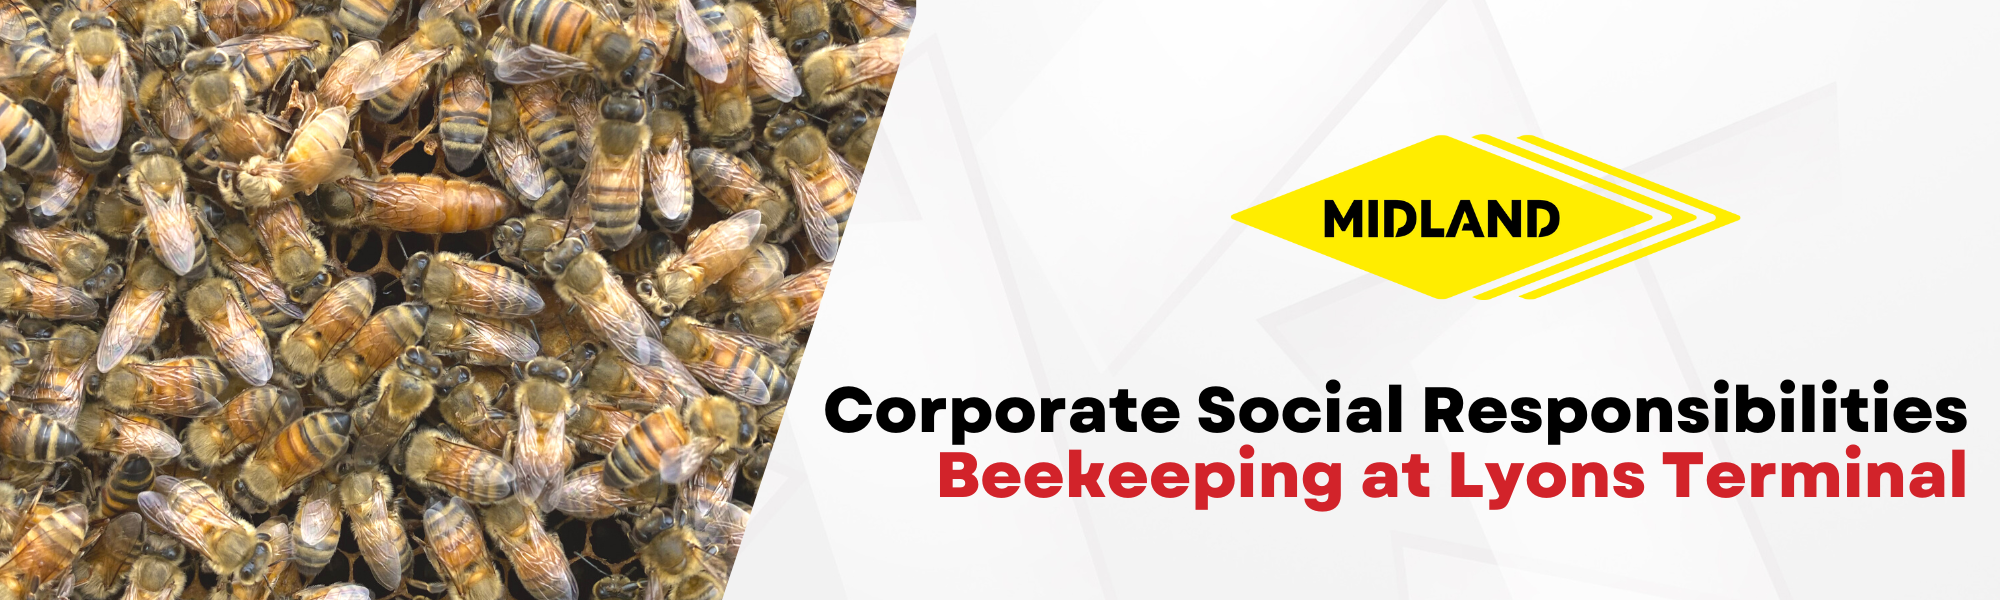 II. How Beekeeping Benefits the Environment and Local Communities